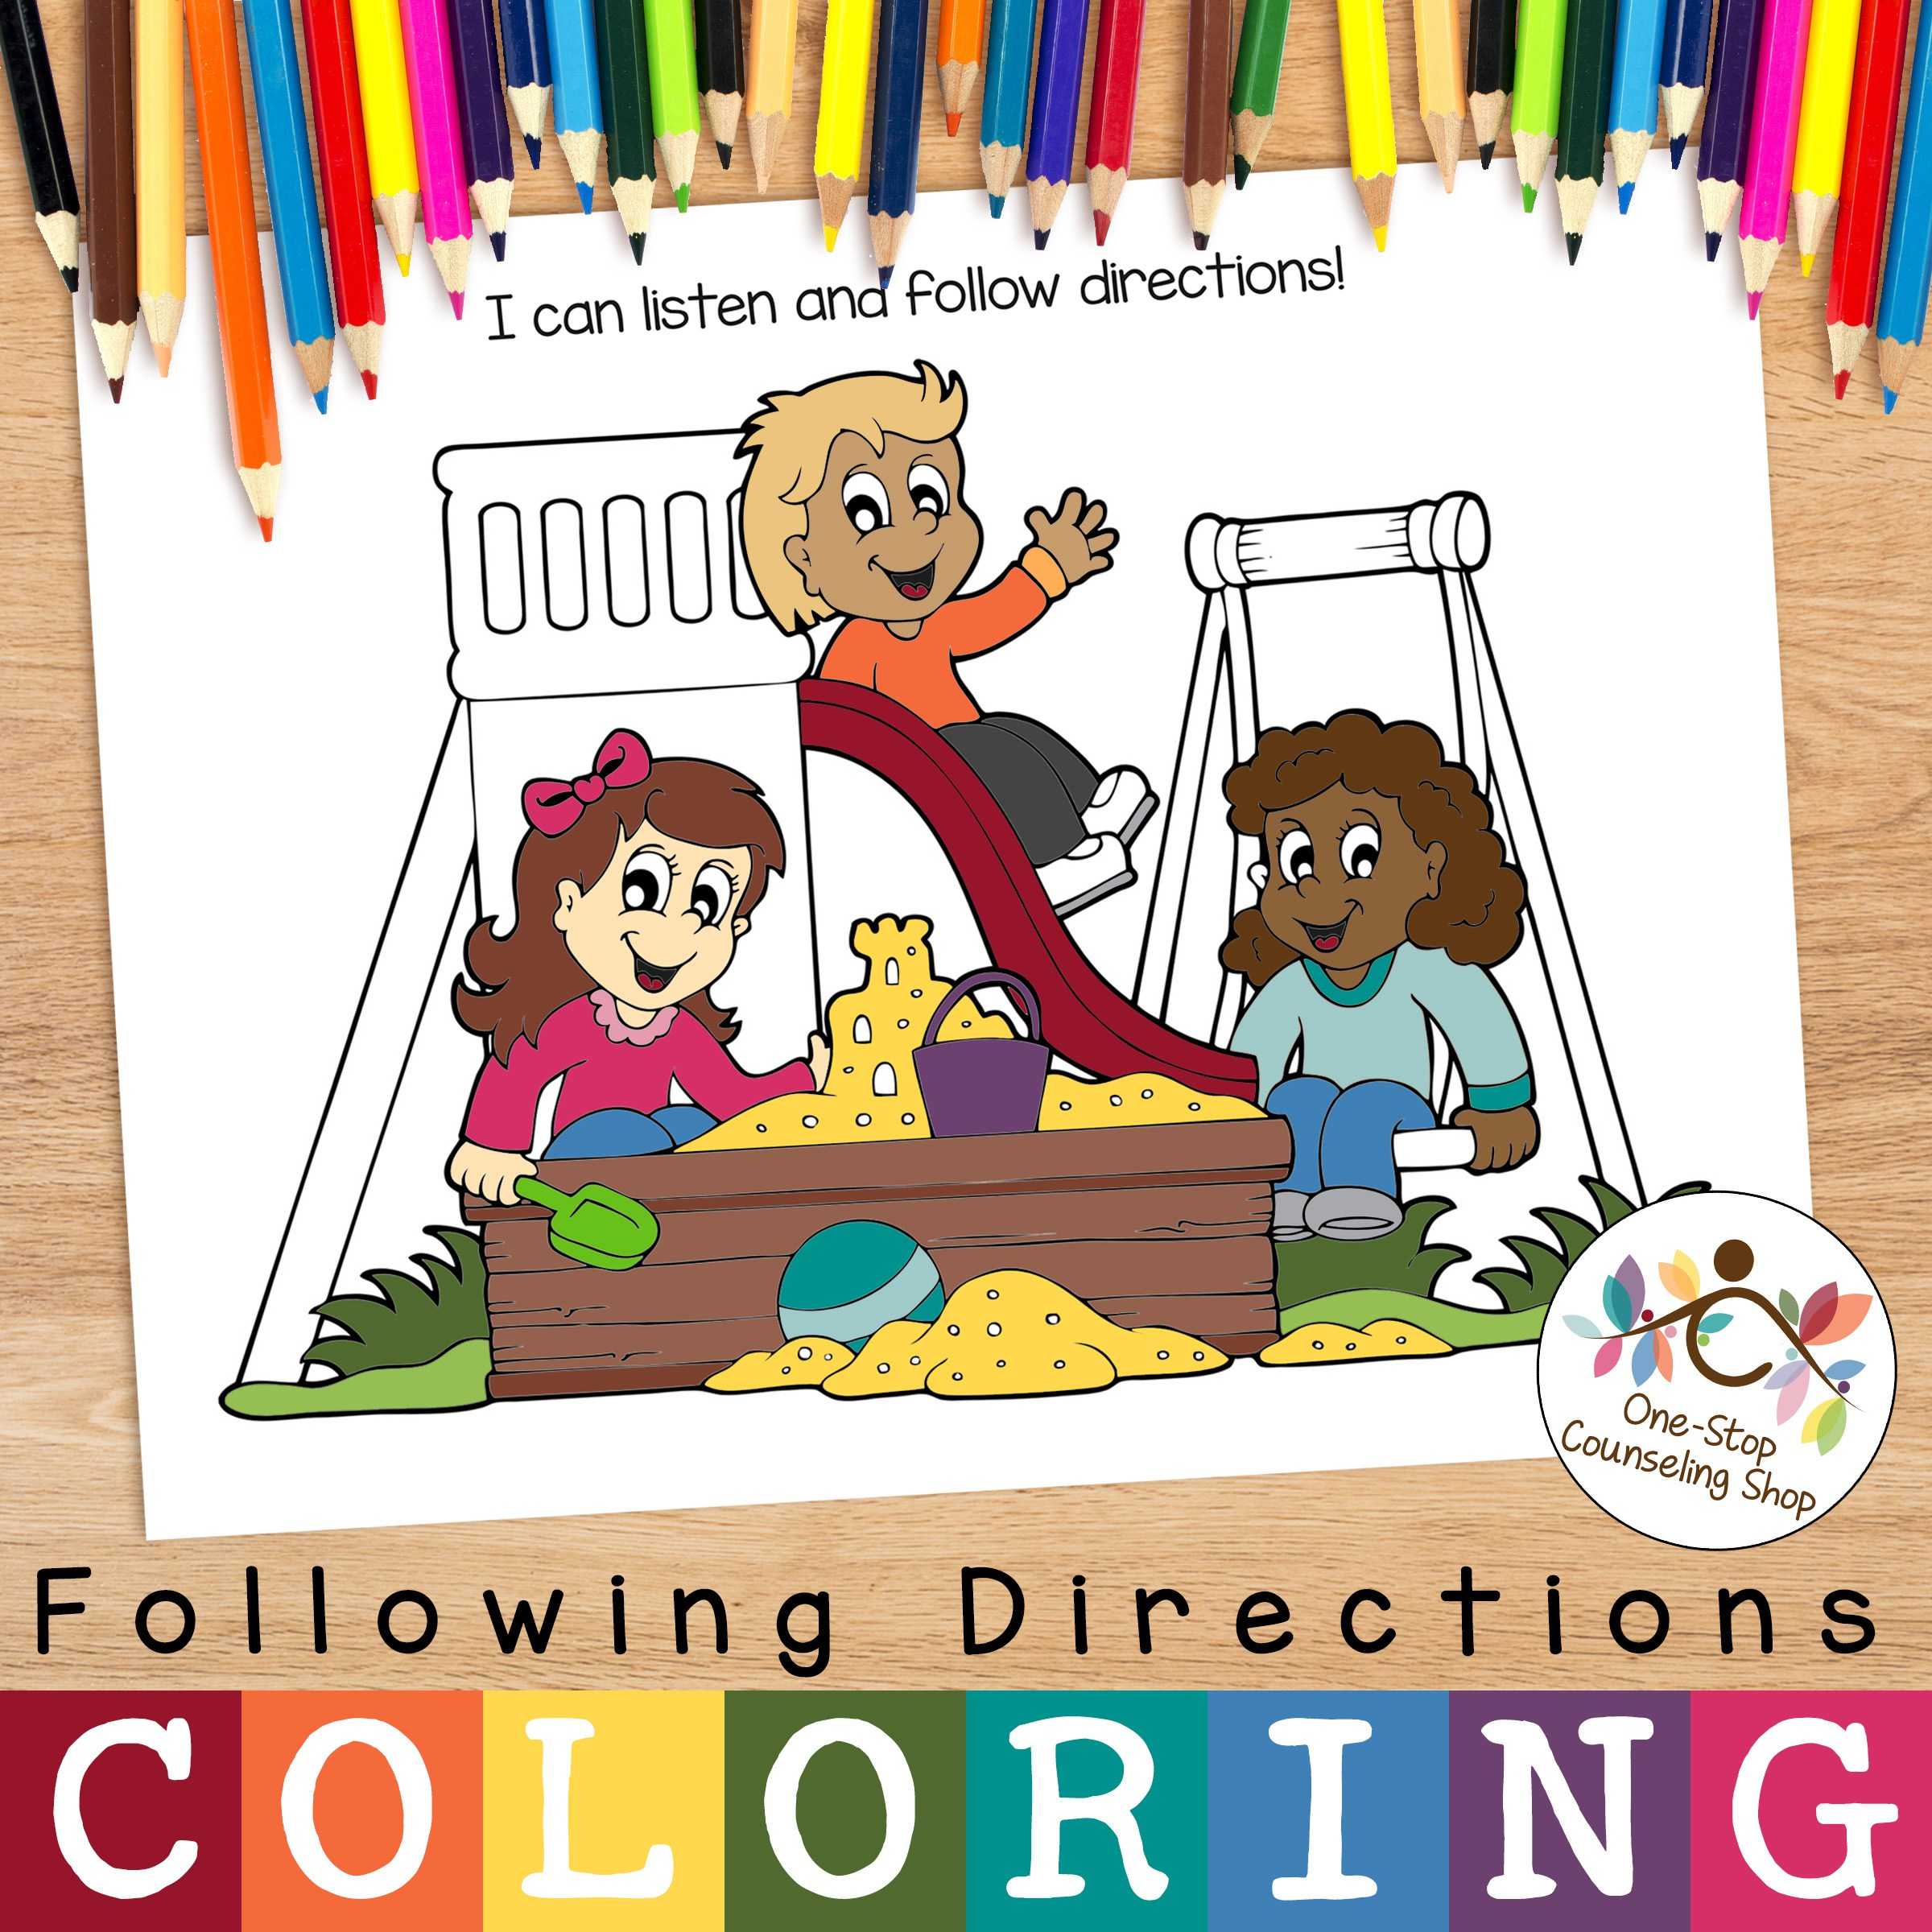 Following Directions Worksheet Middle School Also Following Directions Worksheets for Kindergarten